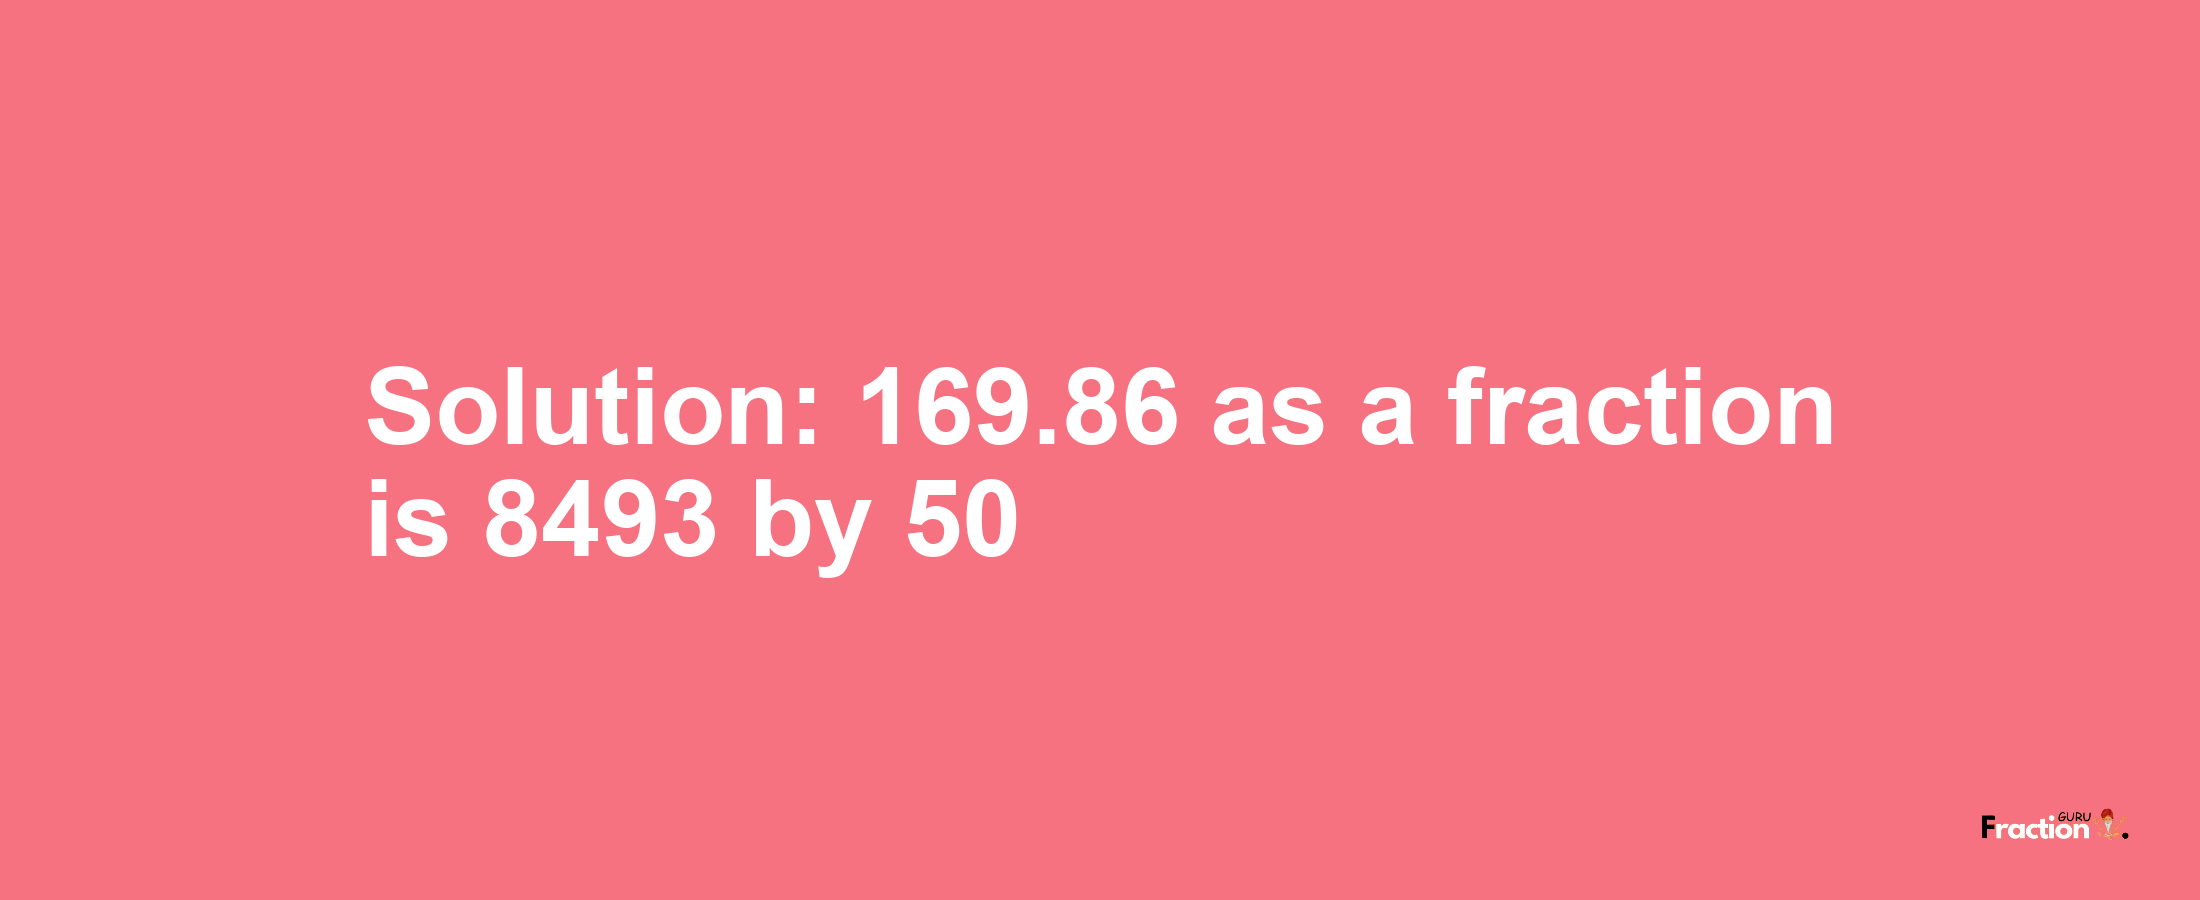 Solution:169.86 as a fraction is 8493/50